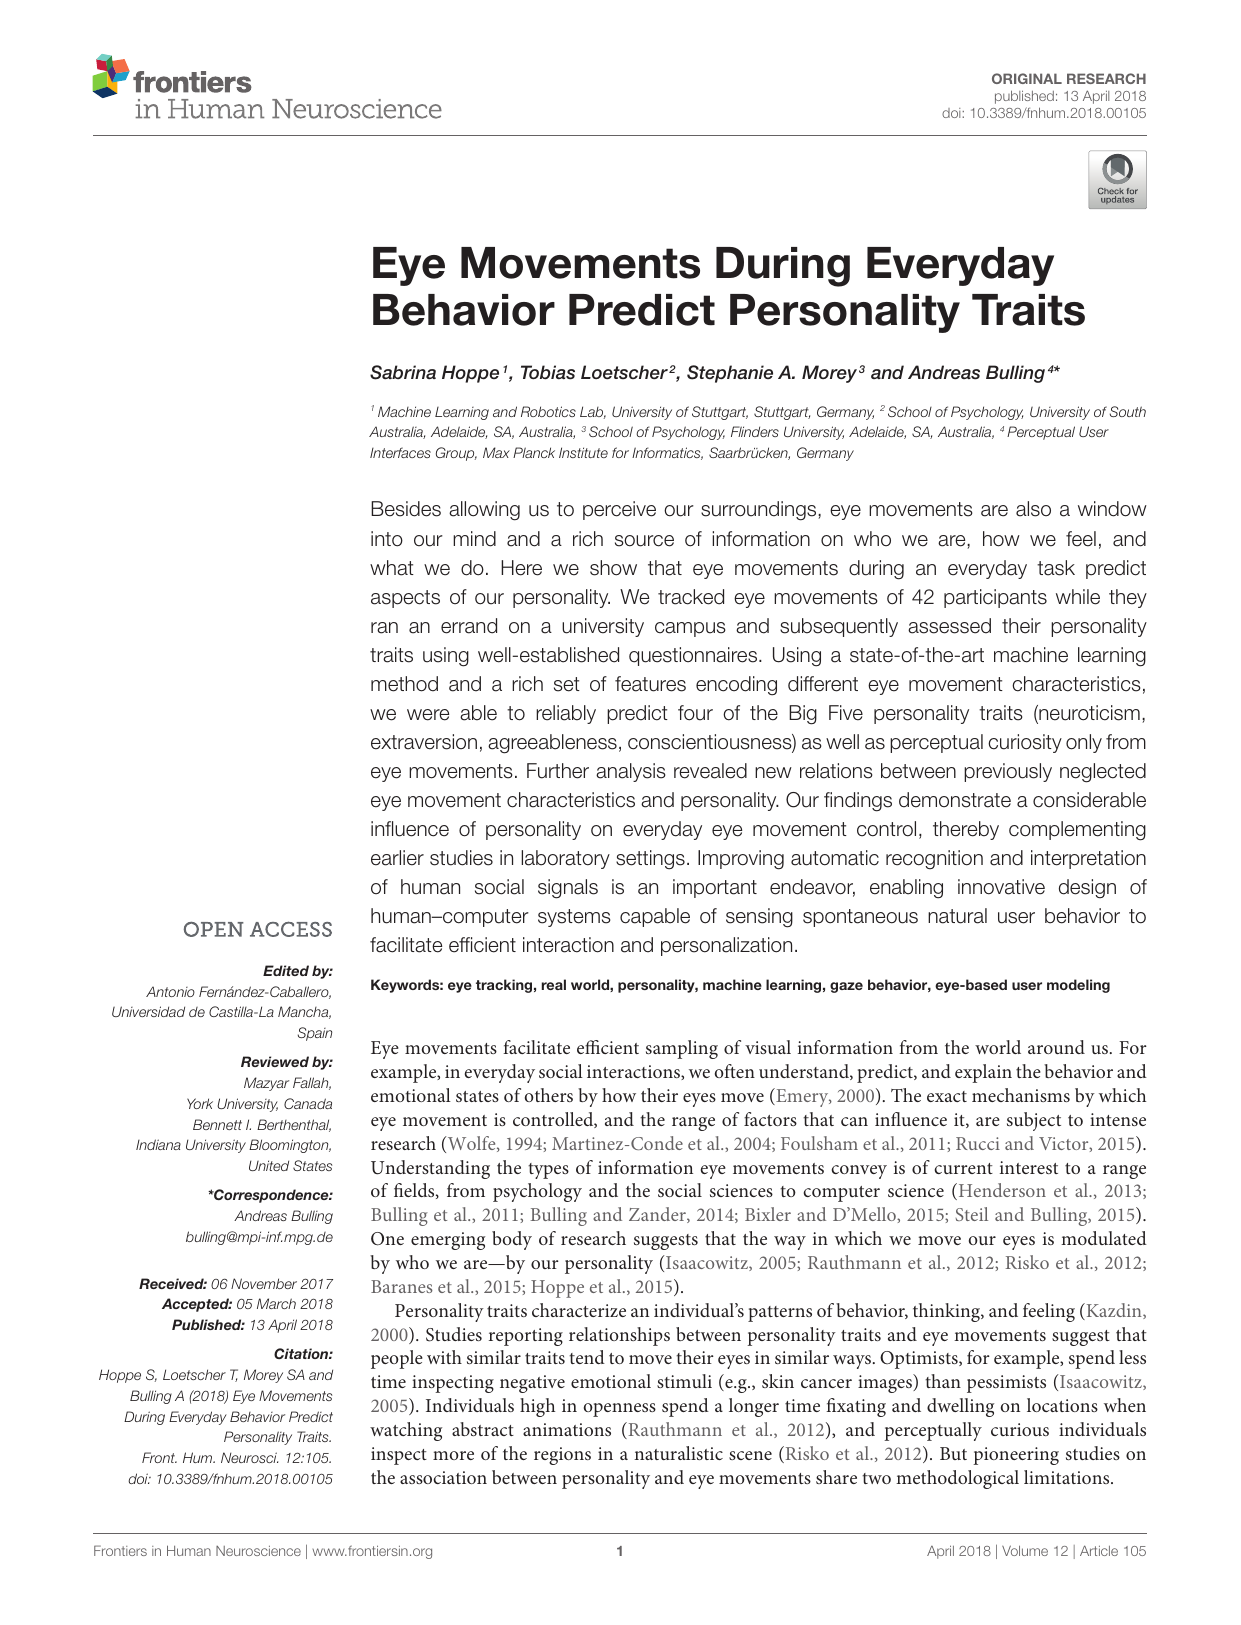 Eye movements during everyday behavior predict personality traits